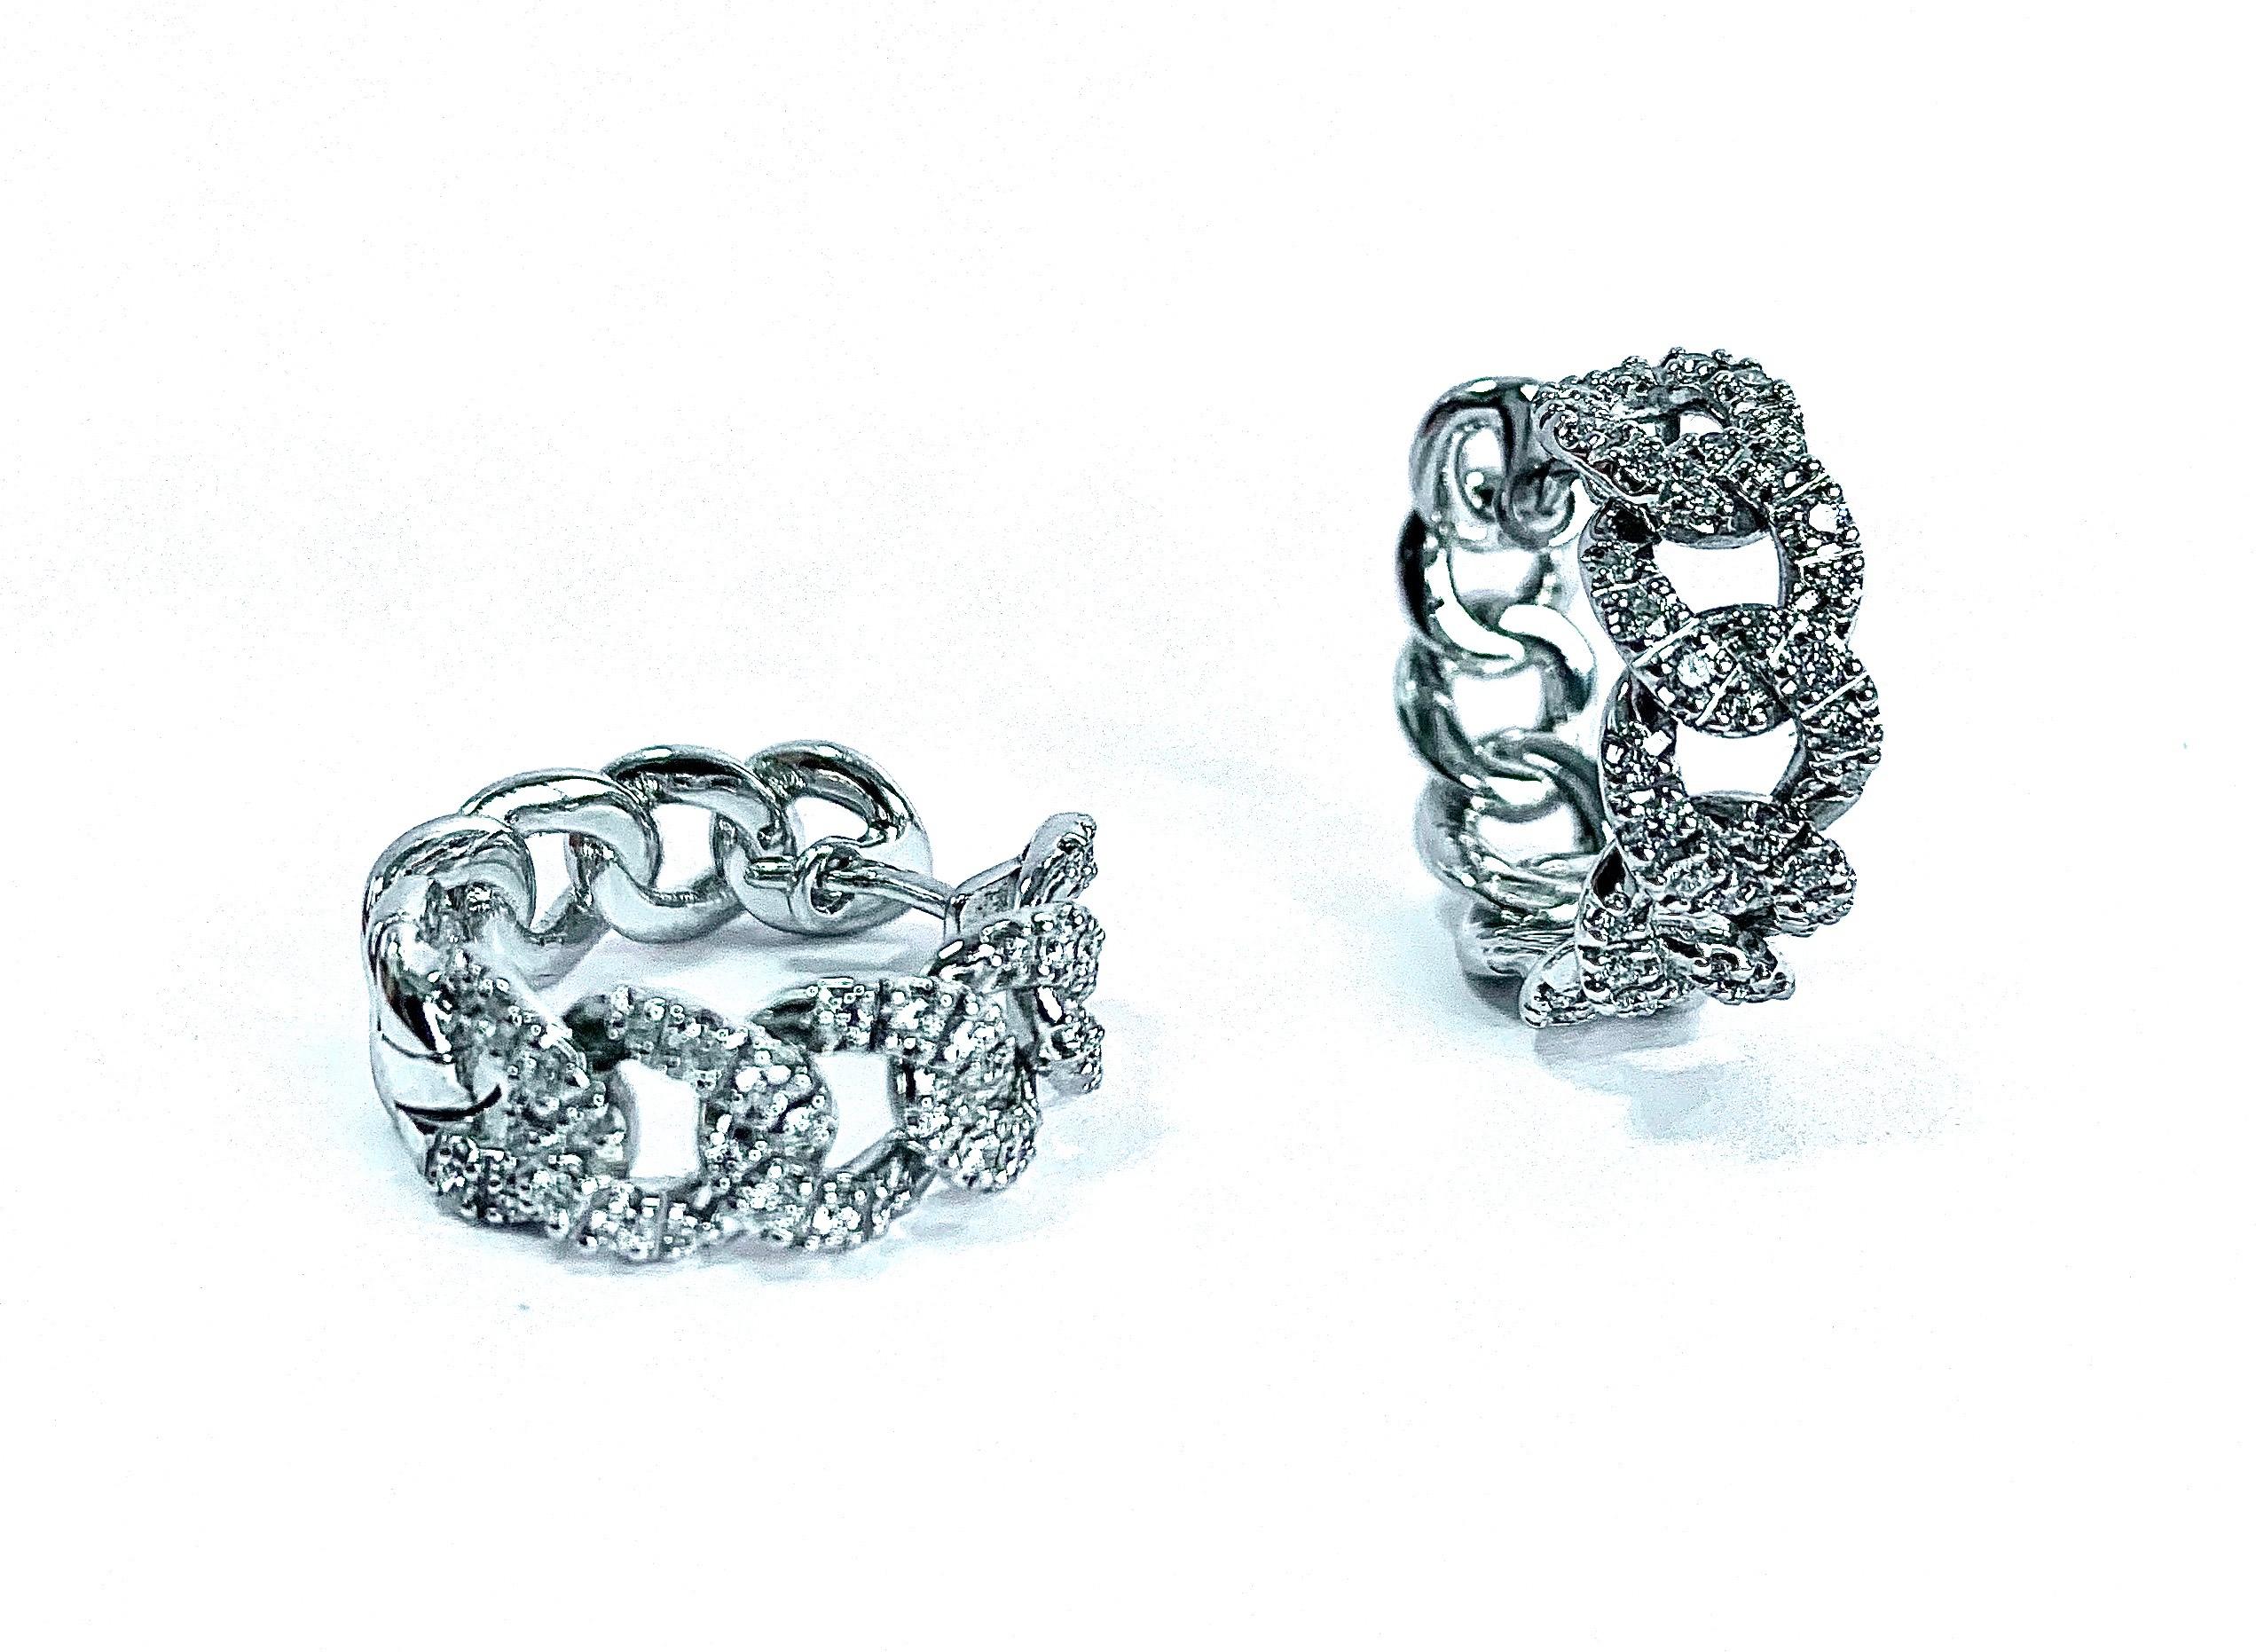 cuban solid white gold earrings hand made in italy
weight of gold gr 10.3
white diamond clarity g quality vvs1 ct 0.60